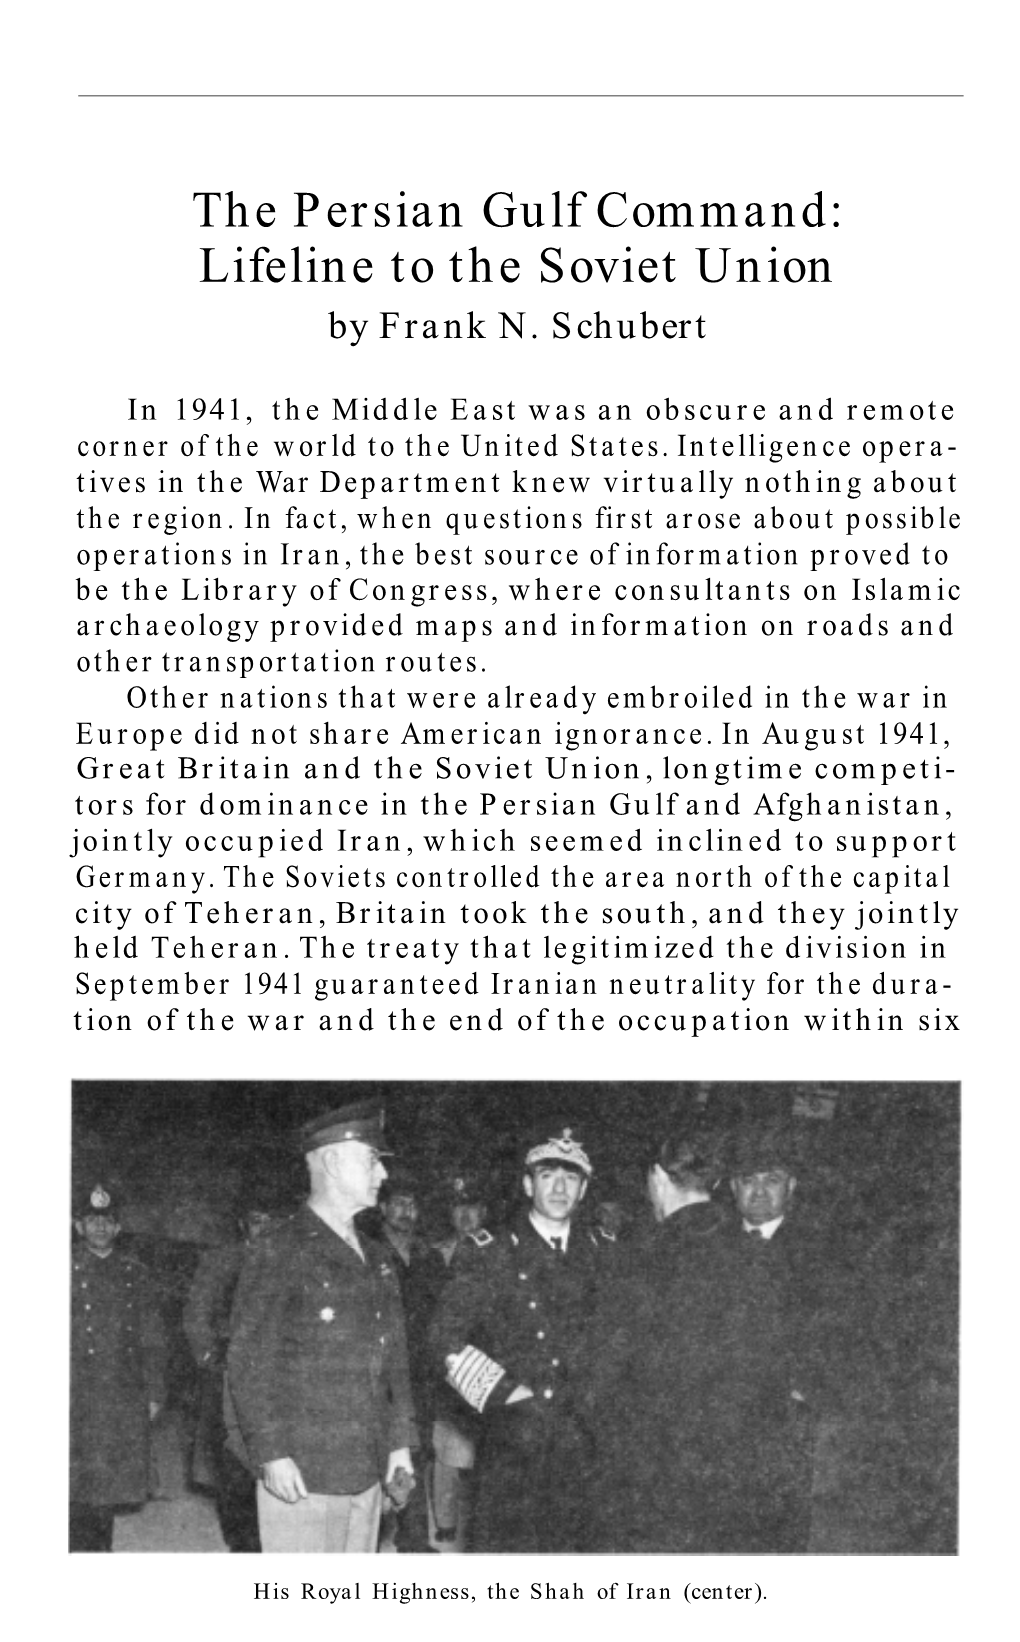 The Persian Gulf Command: Lifeline to the Soviet Union by Frank N